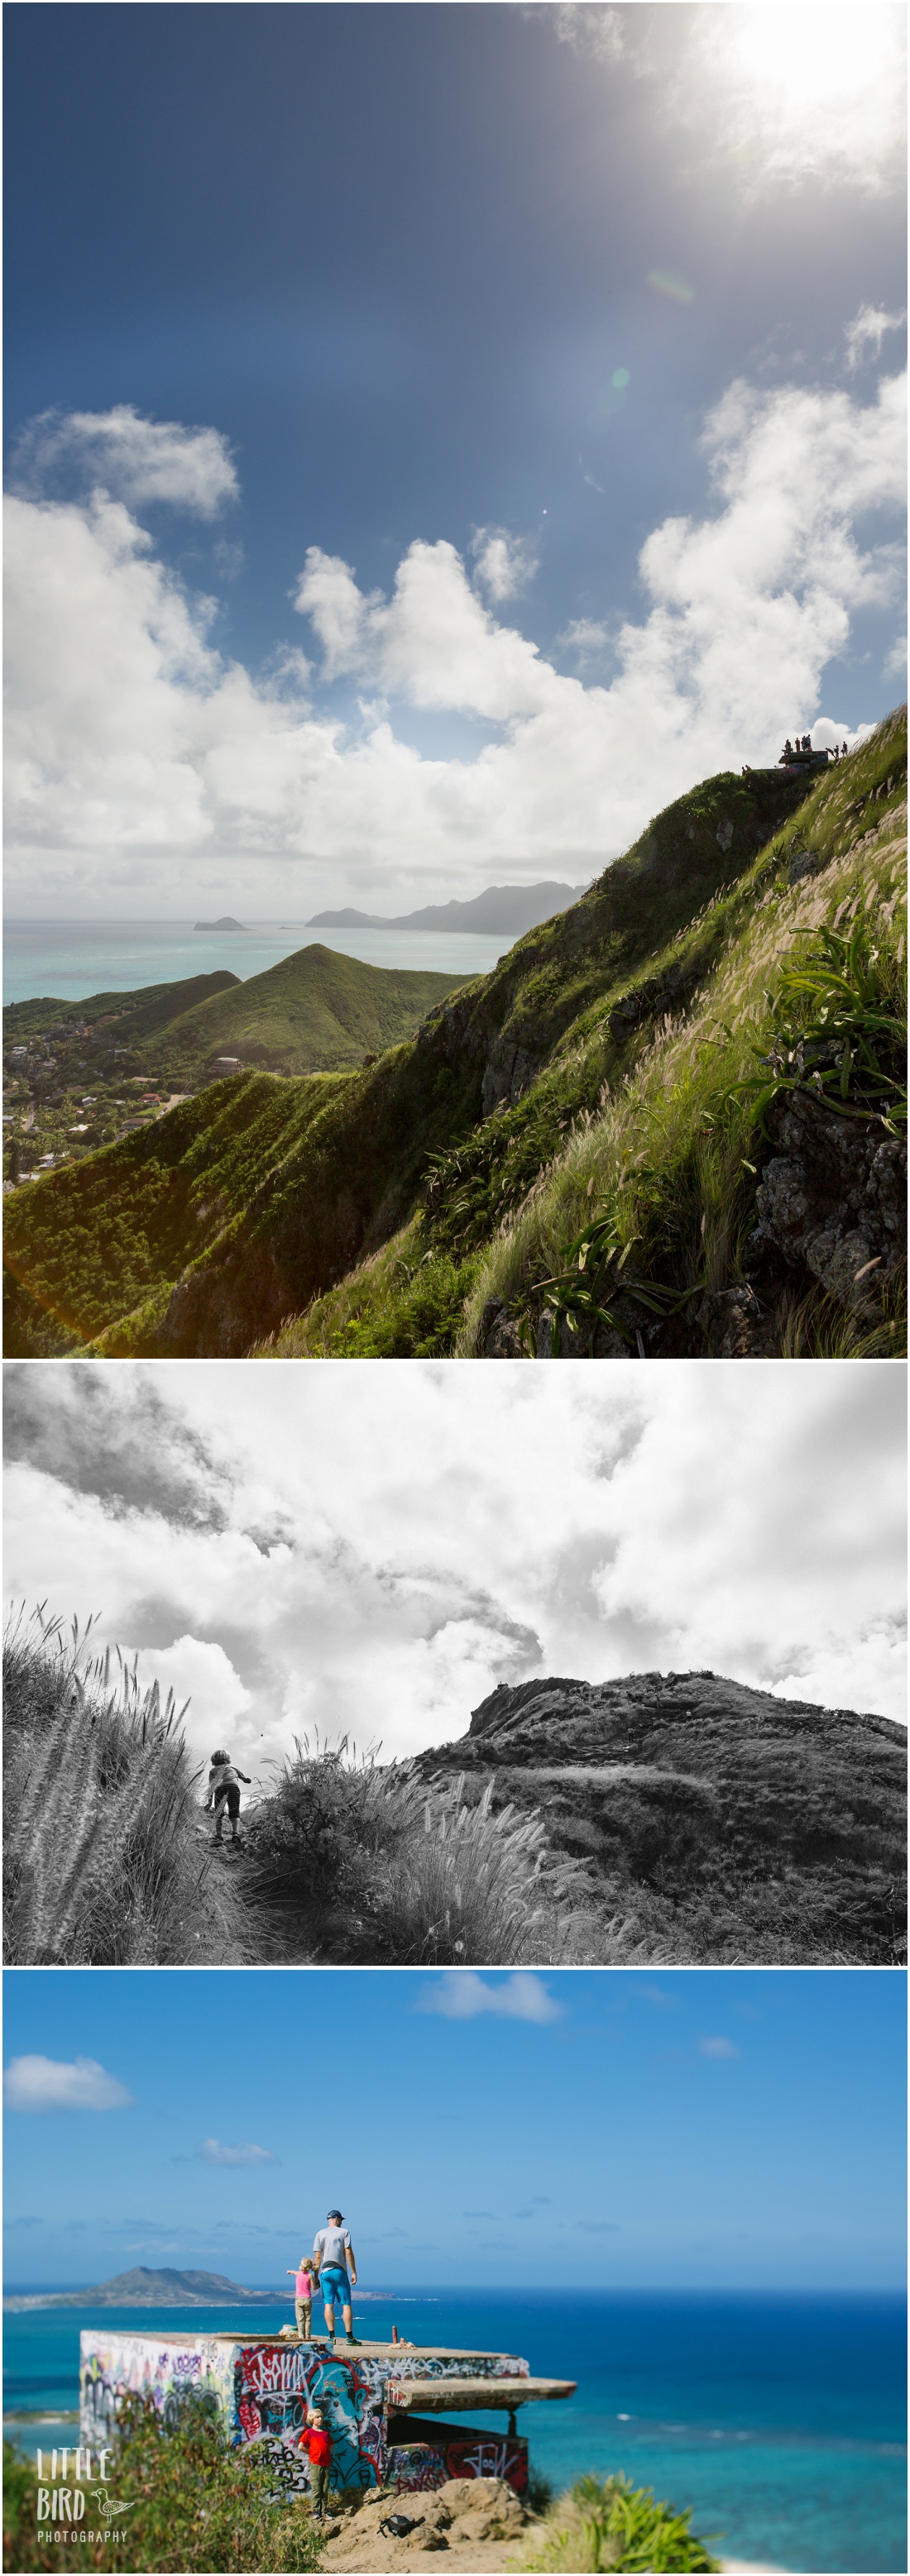 view from the first pillbox of lanikai pillbox trail